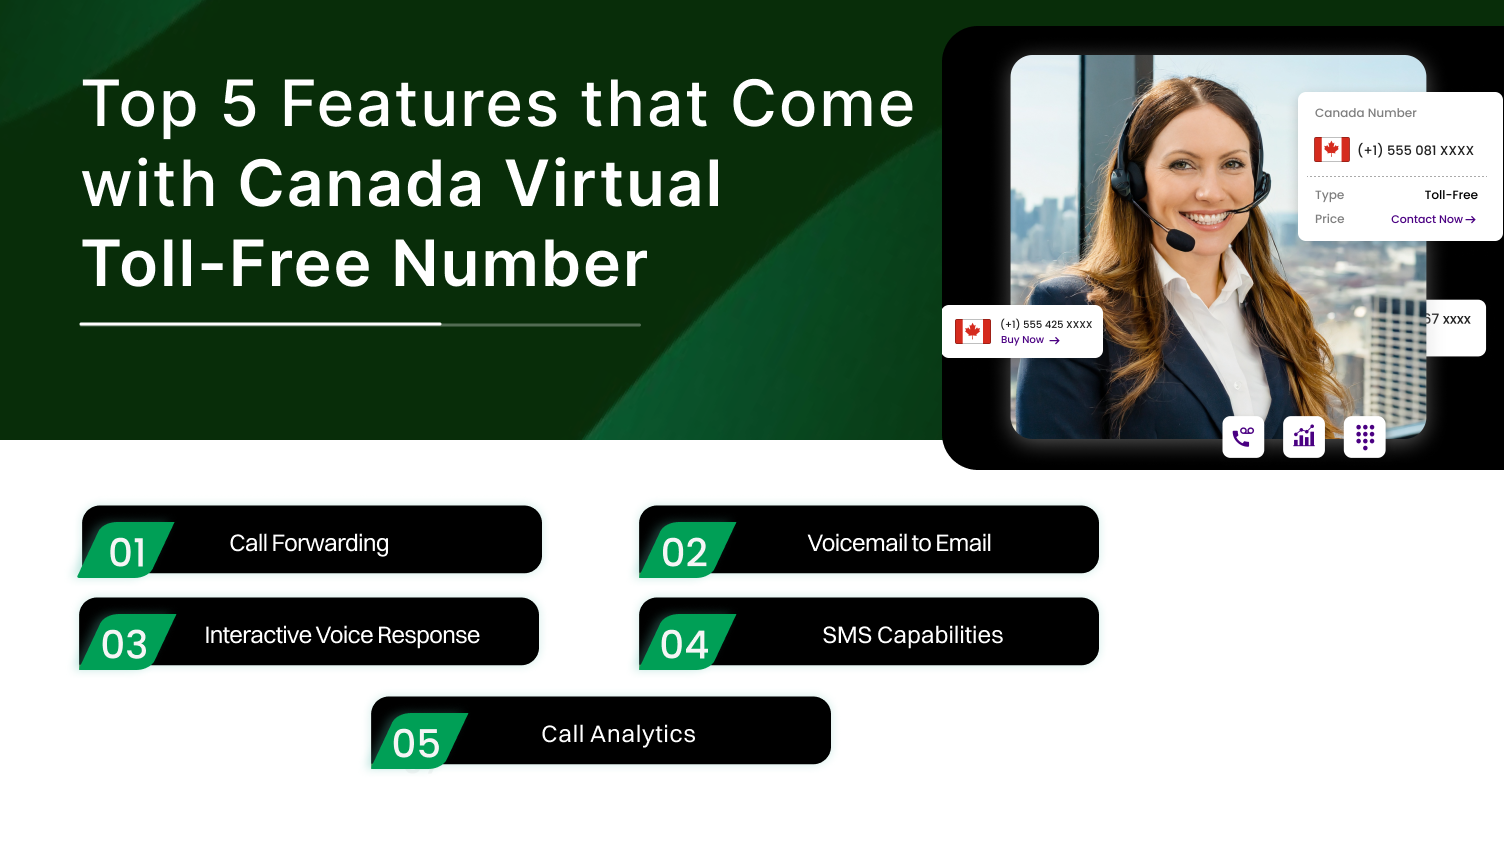 Top 5 Features that Come with Canada Virtual Toll-Free Number